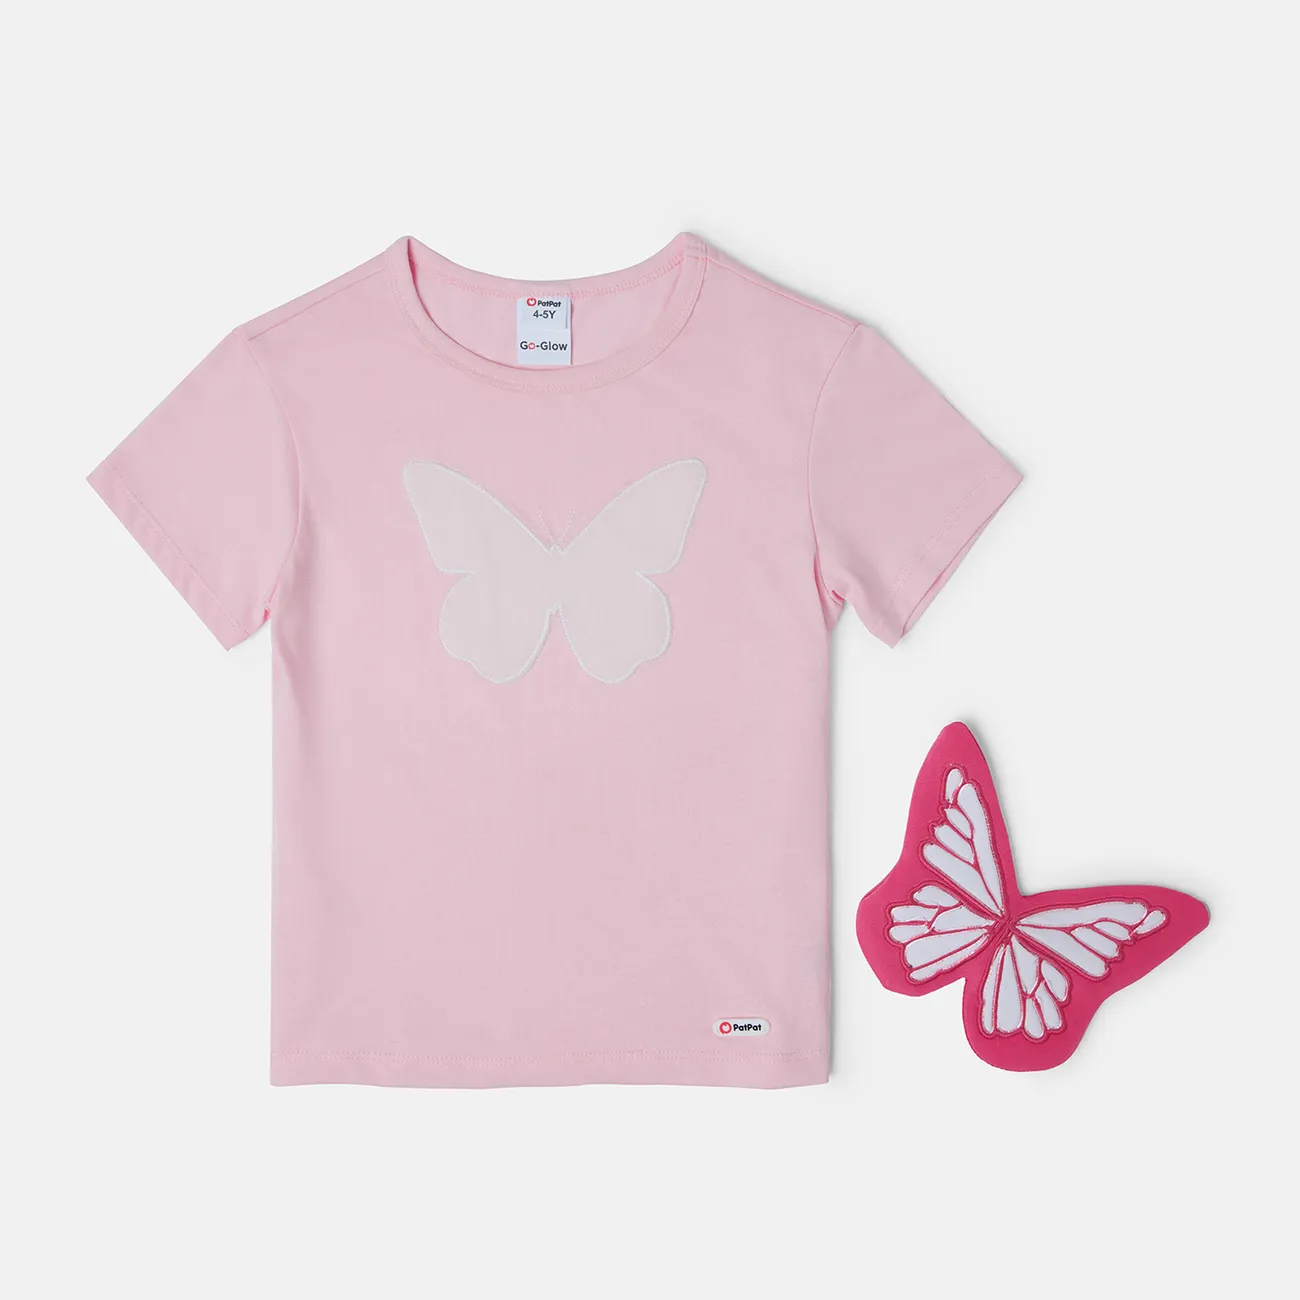 Go-Glow Illuminating T-shirt with Removable Light Up Butterfly Including Controller (Built-In Battery) Pink big image 1